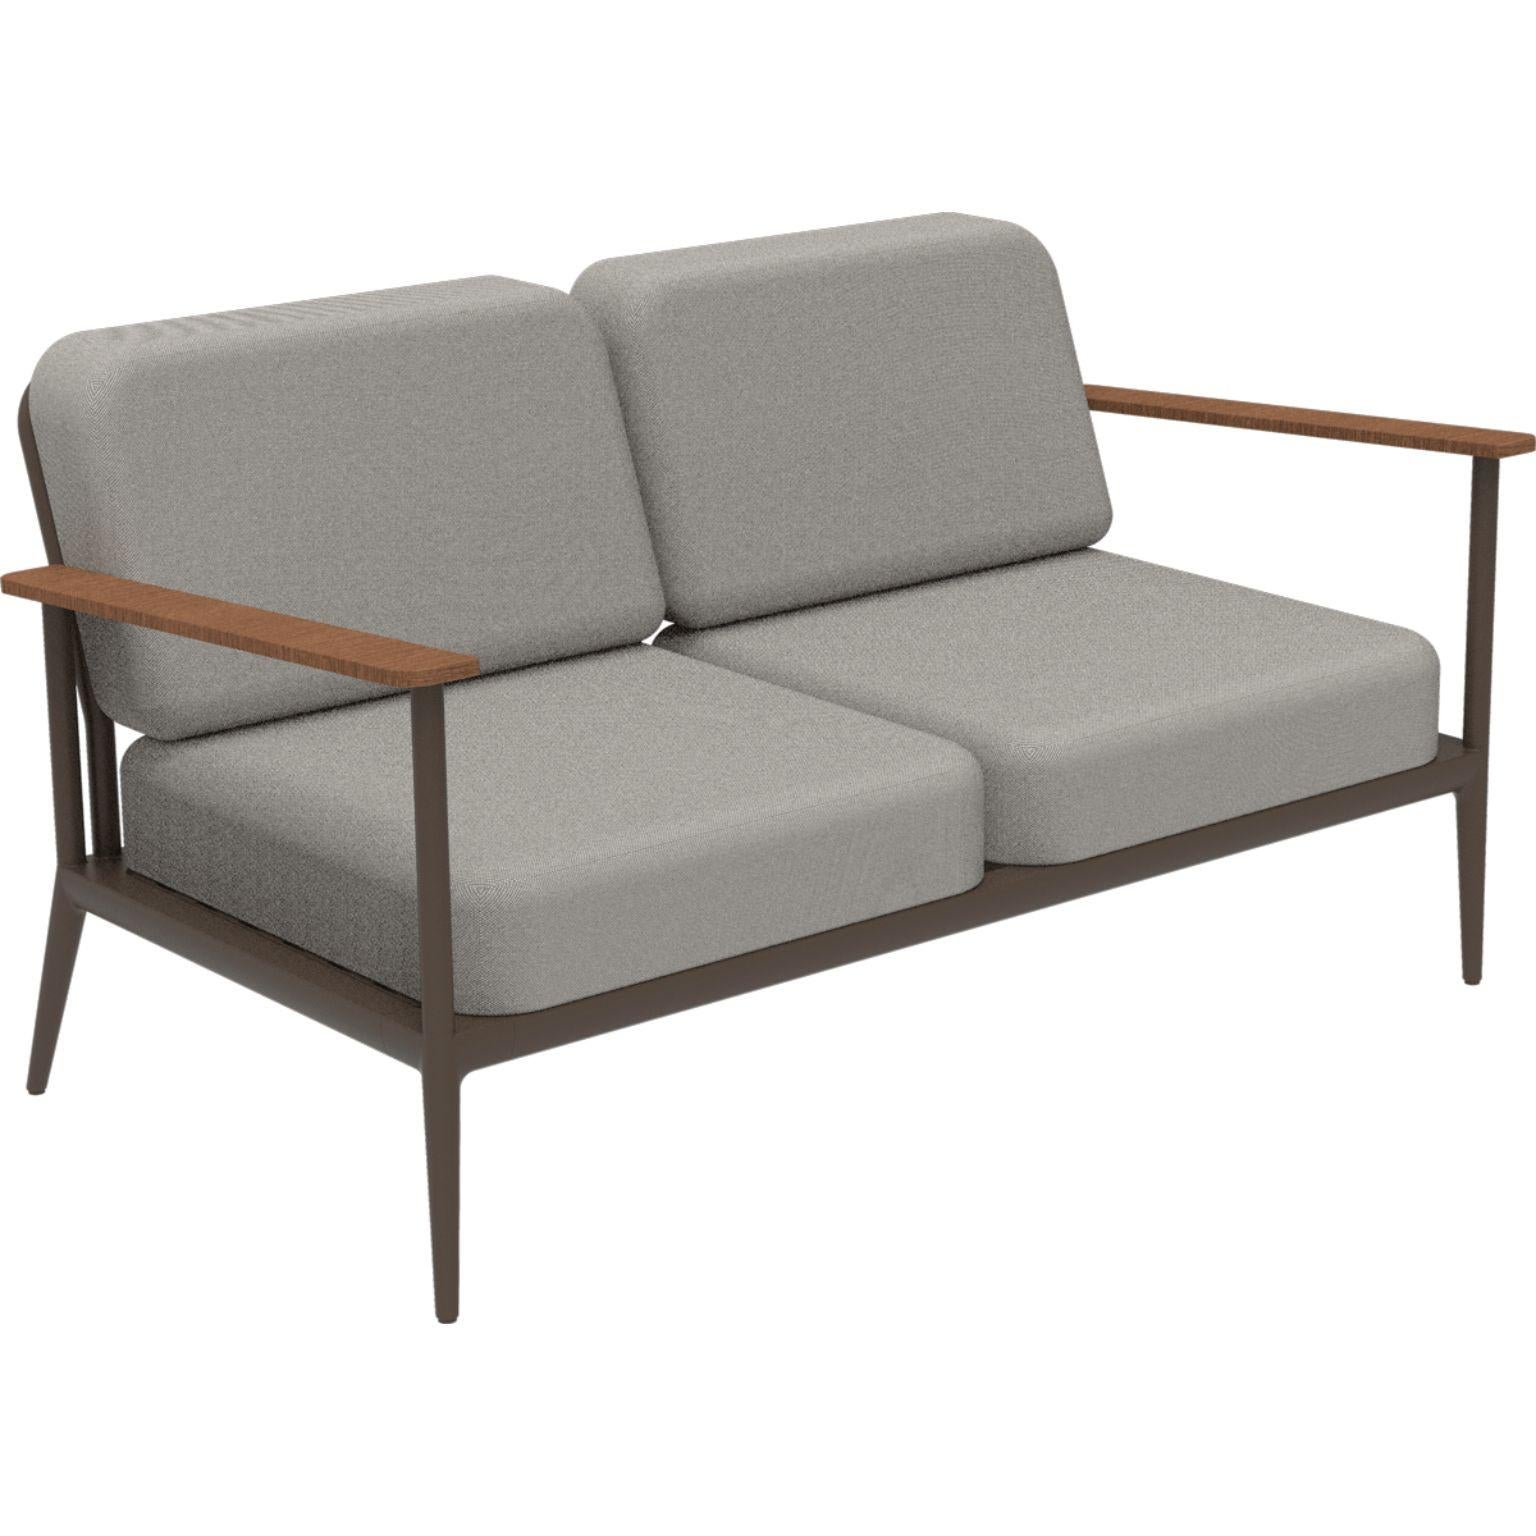 Nature bronze sofa by MOWEE
Dimensions: D85 x W151 x H81 cm (seat height 42 cm).
Material: aluminum, upholstery and Iroko Wood.
Weight: 32 kg.
Also available in different colors and finishes.

An unmistakable collection for its beauty and